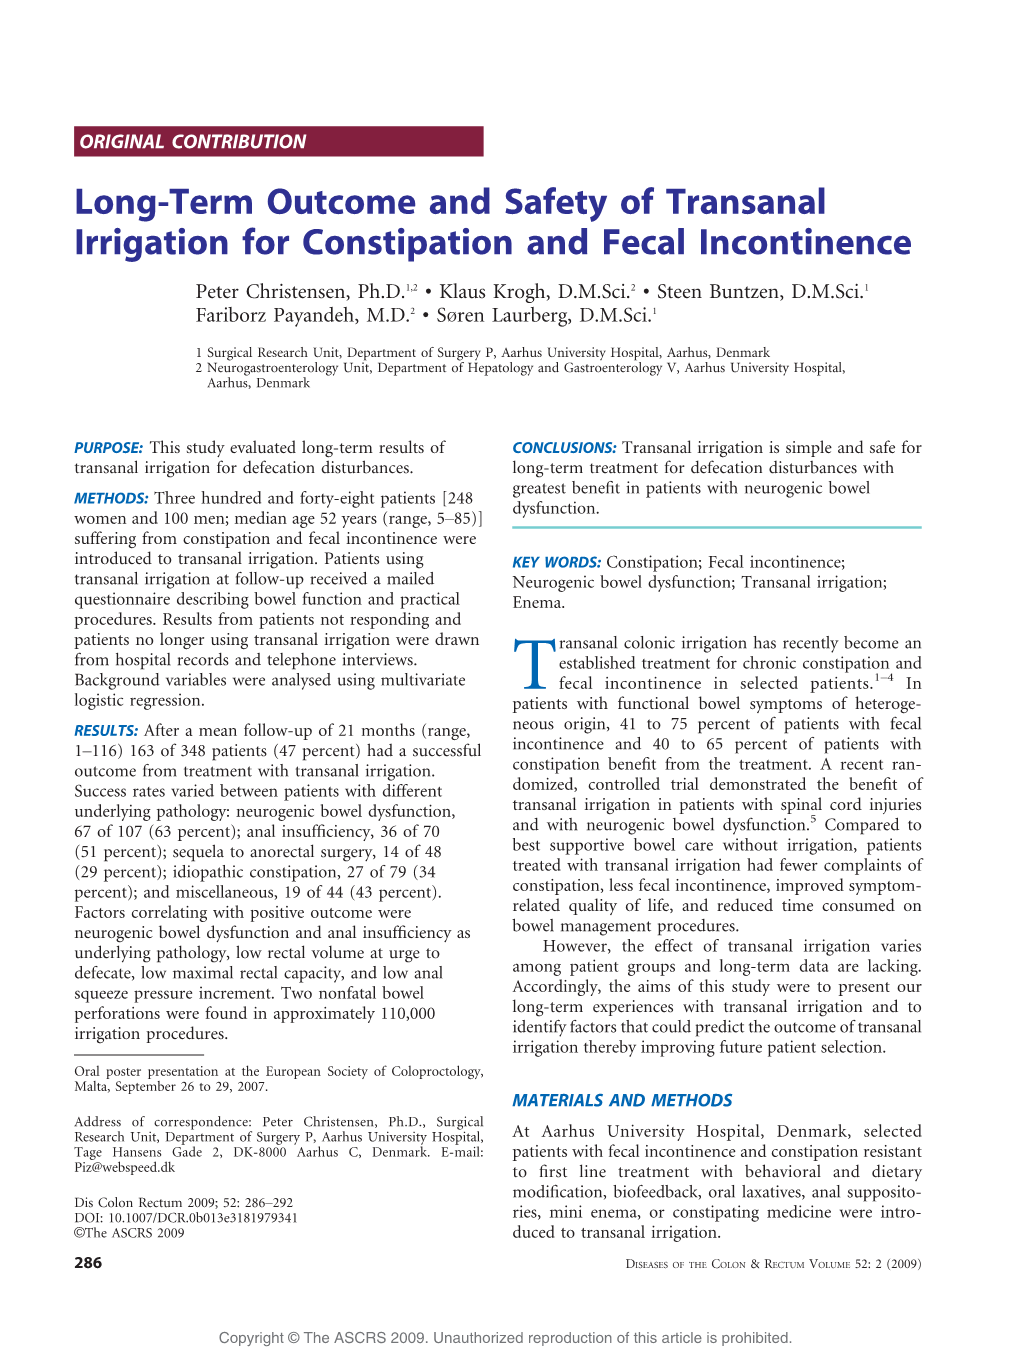 Long-Term Outcome and Safety of Transanal Irrigation for Constipation and Fecal Incontinence